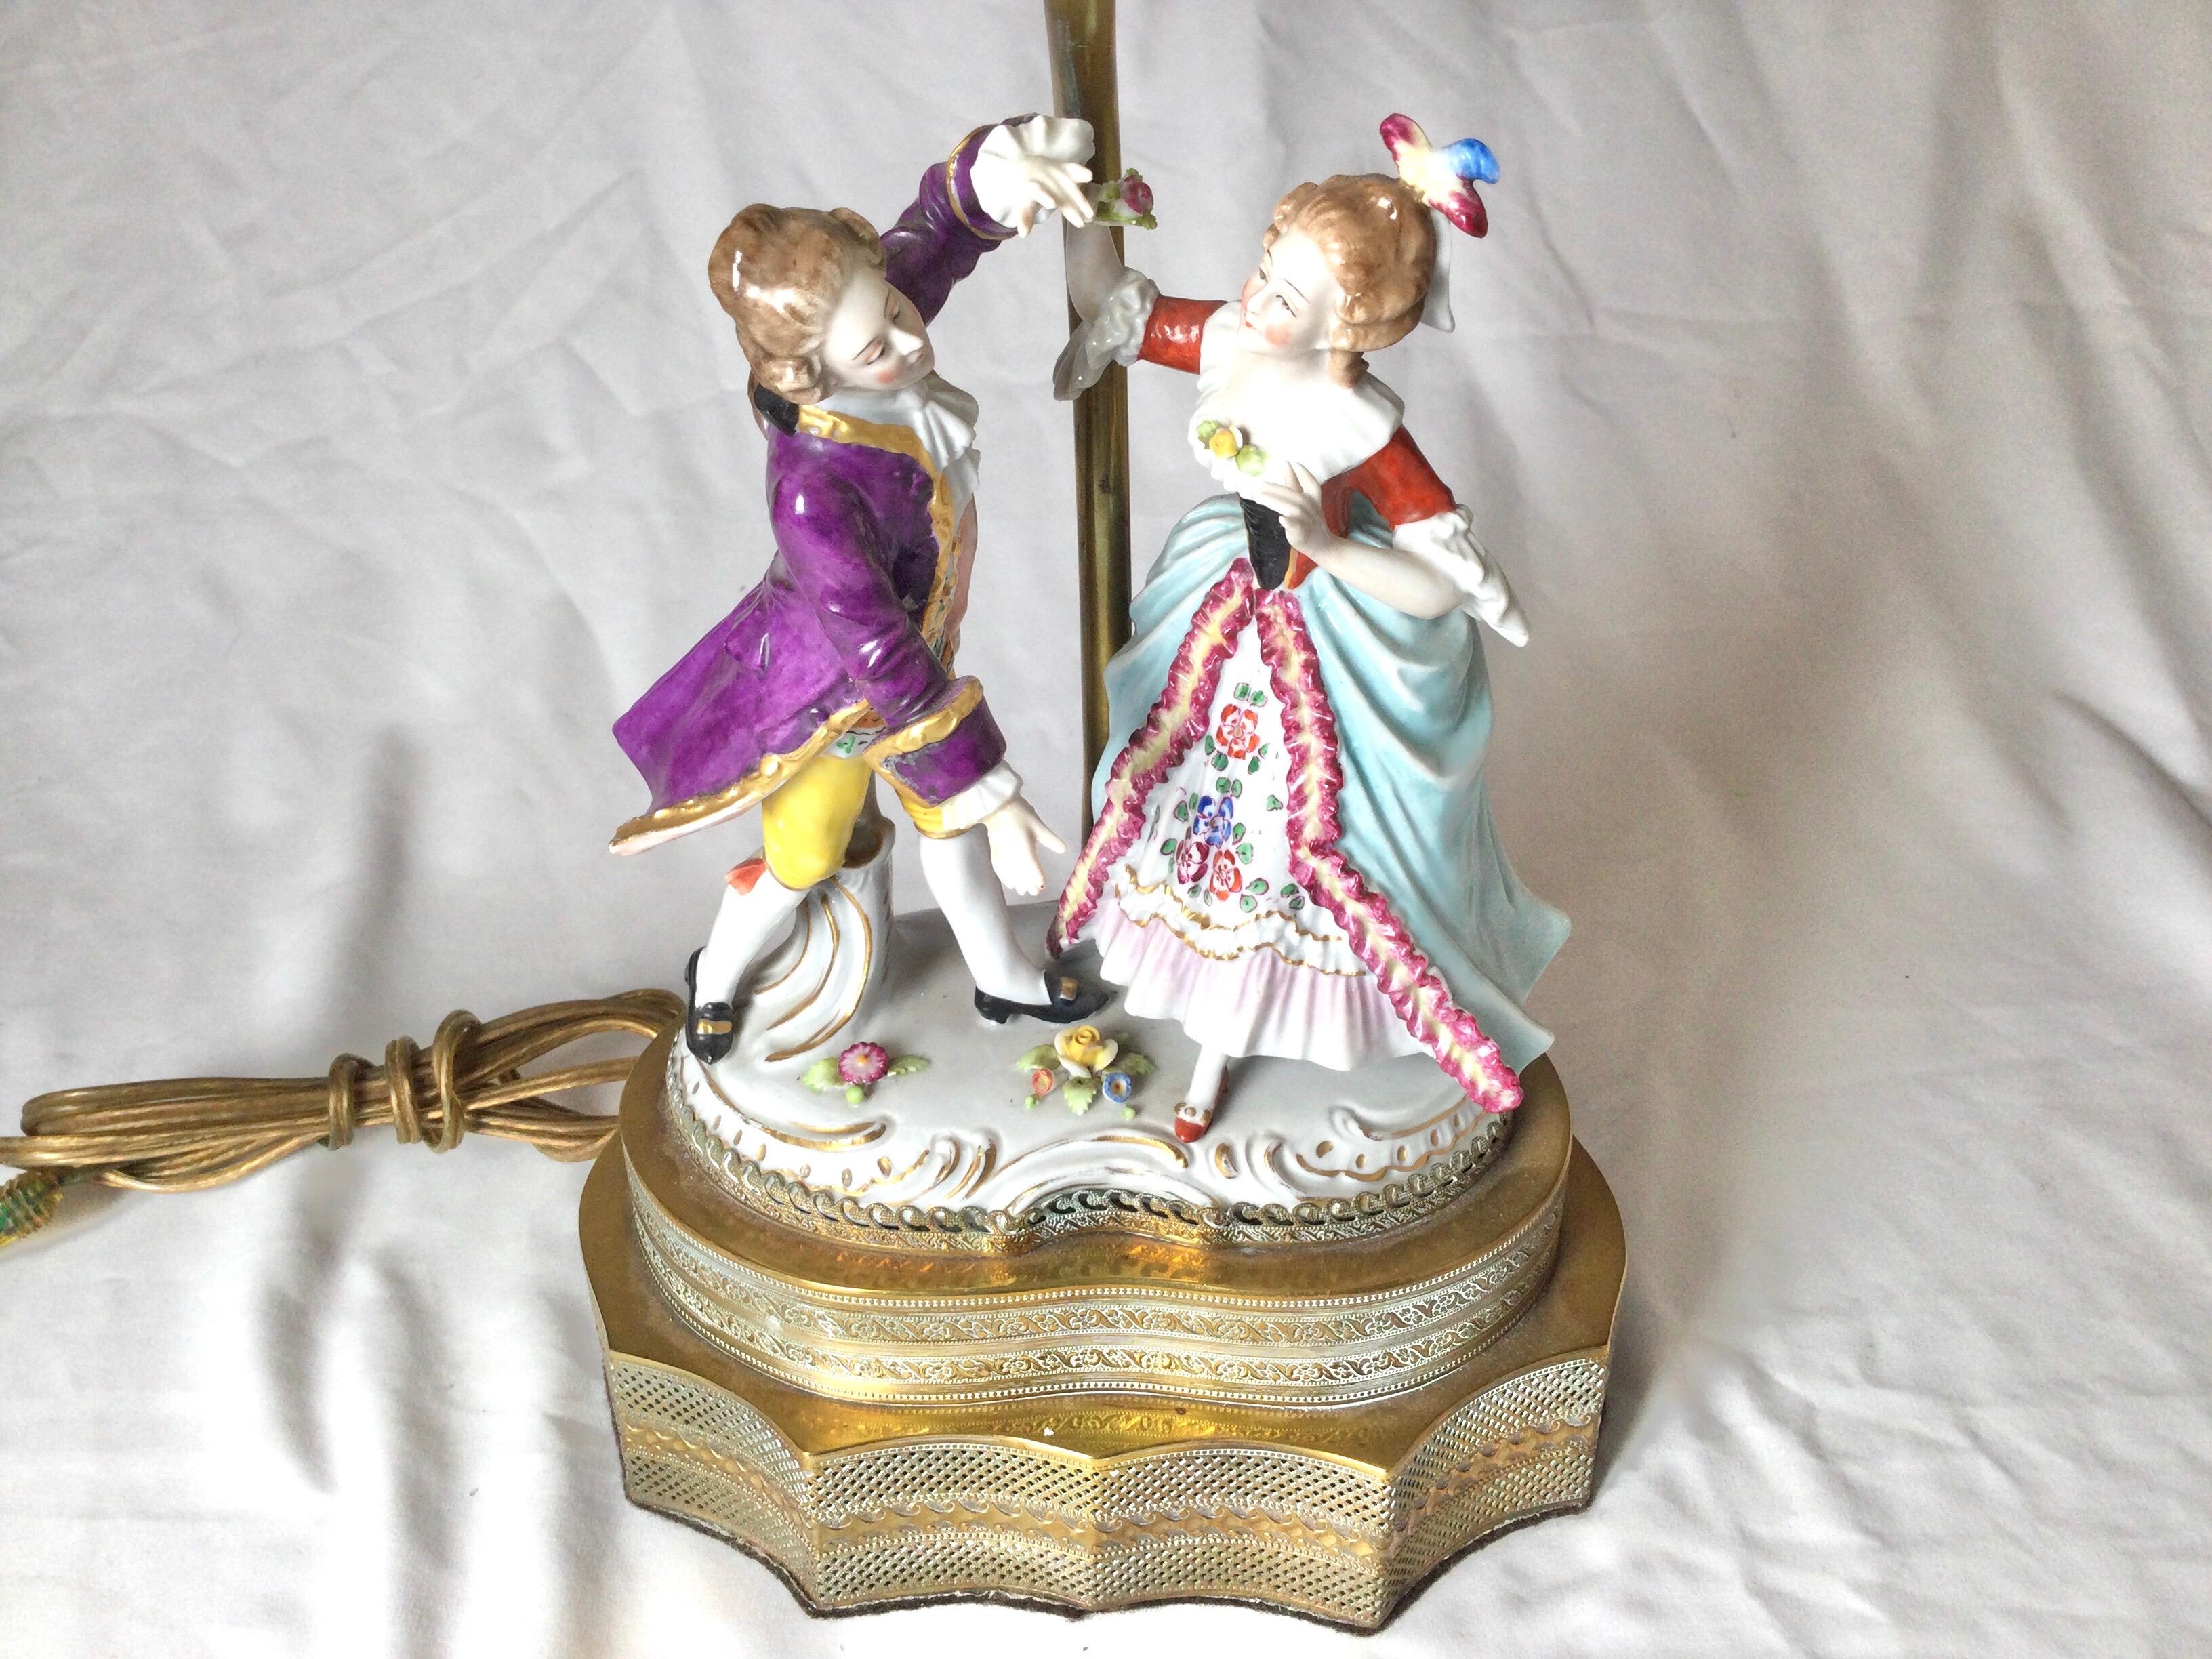 A finely painted Dresden porcelain figurine from the 19th century now as a lamp. The figure of a 18th century style courting couple that has not been drilled. The aged brass base and pole which was added in the earlier part of the 20th century. The